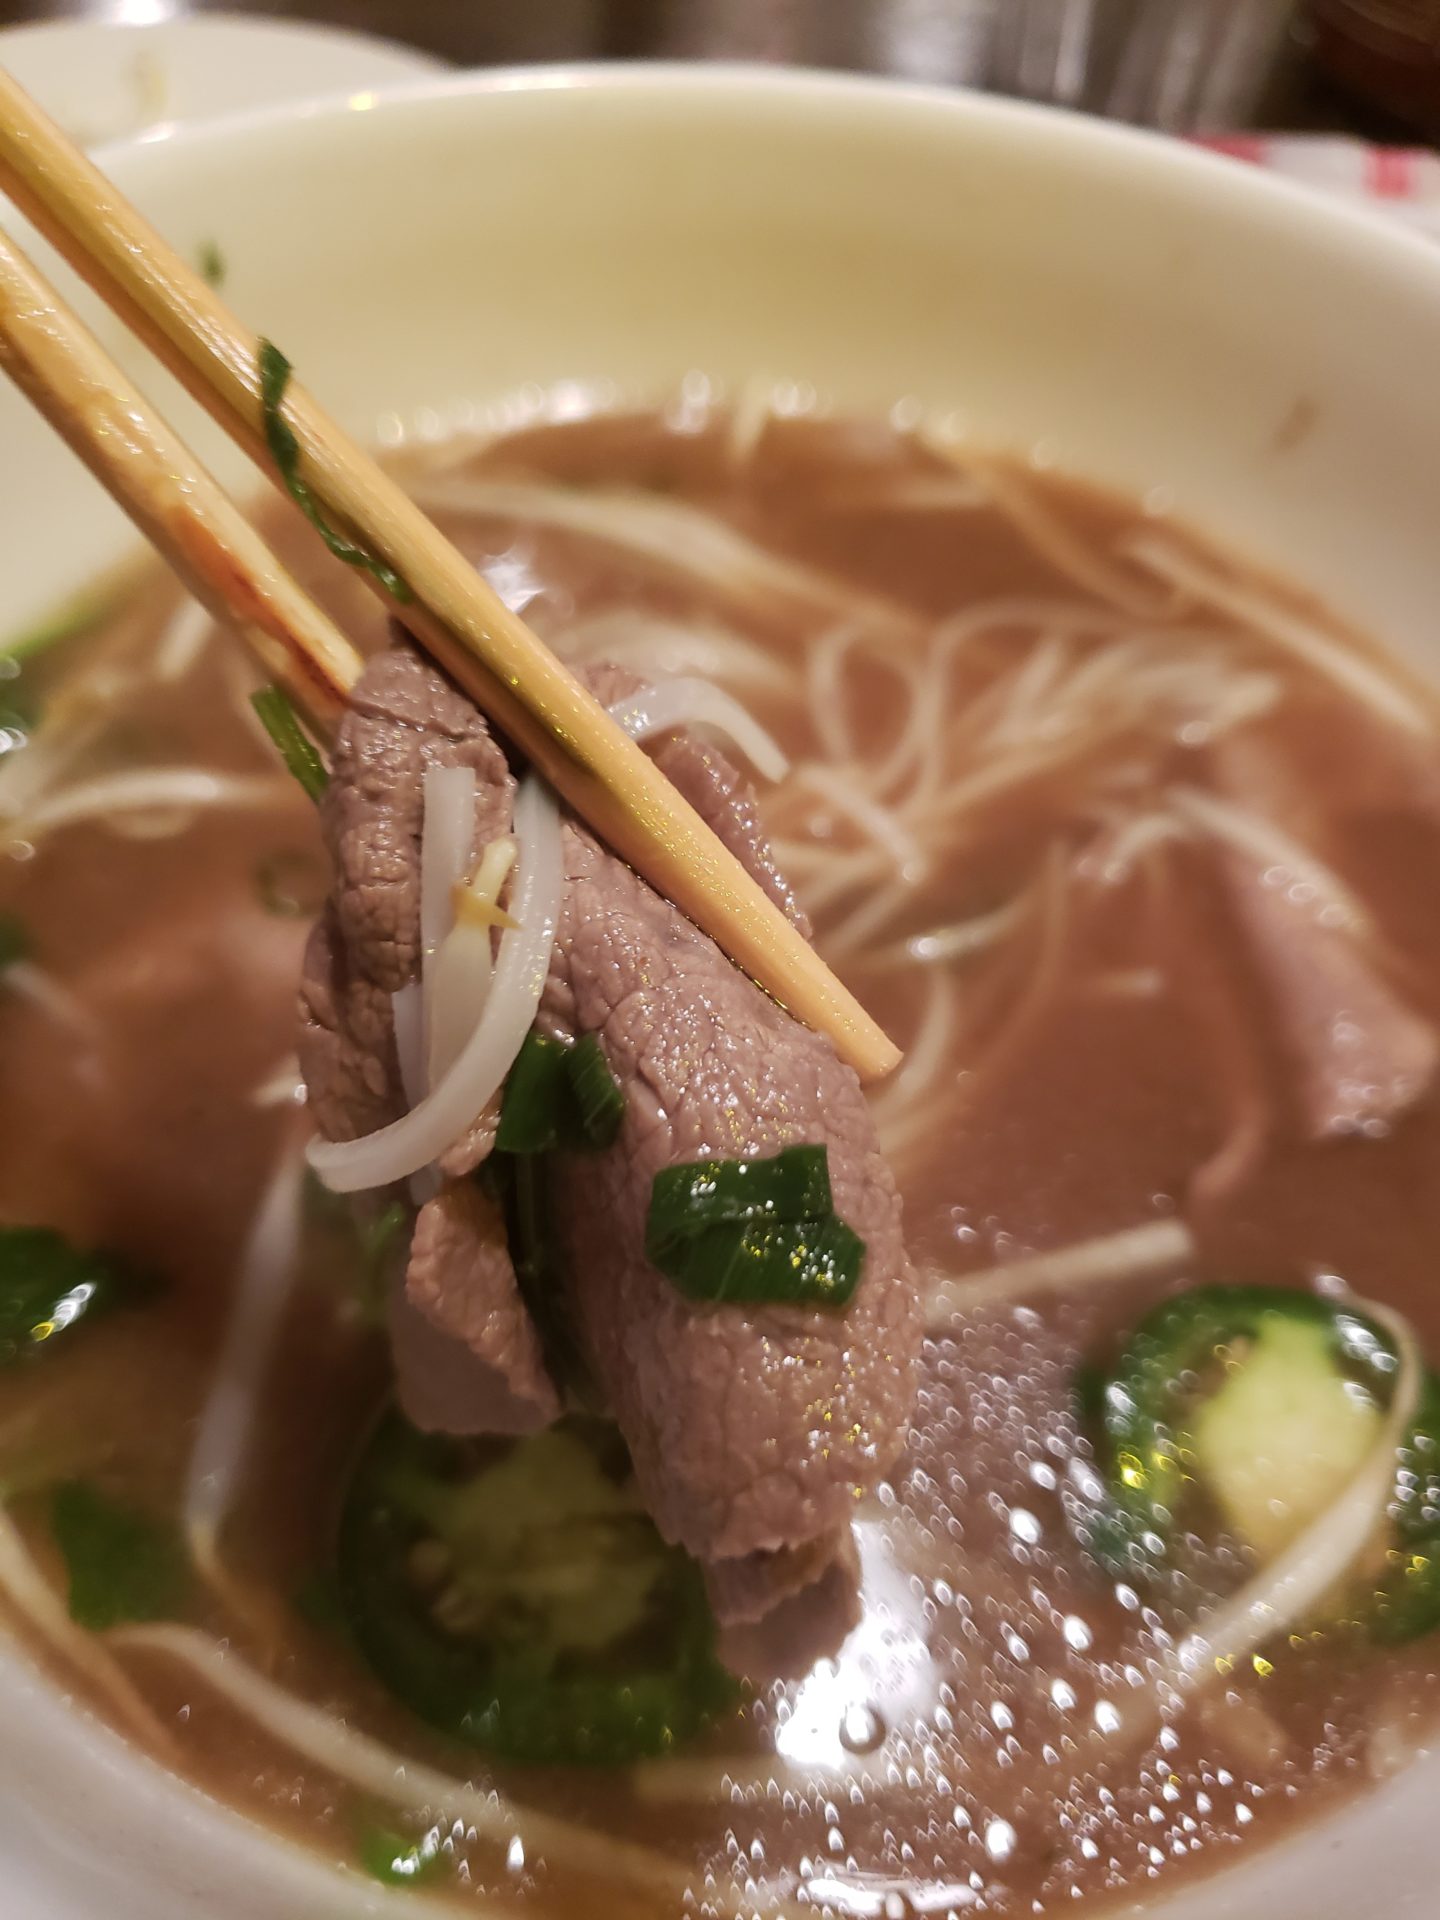 chopsticks holding a bowl of soup with meat and vegetables